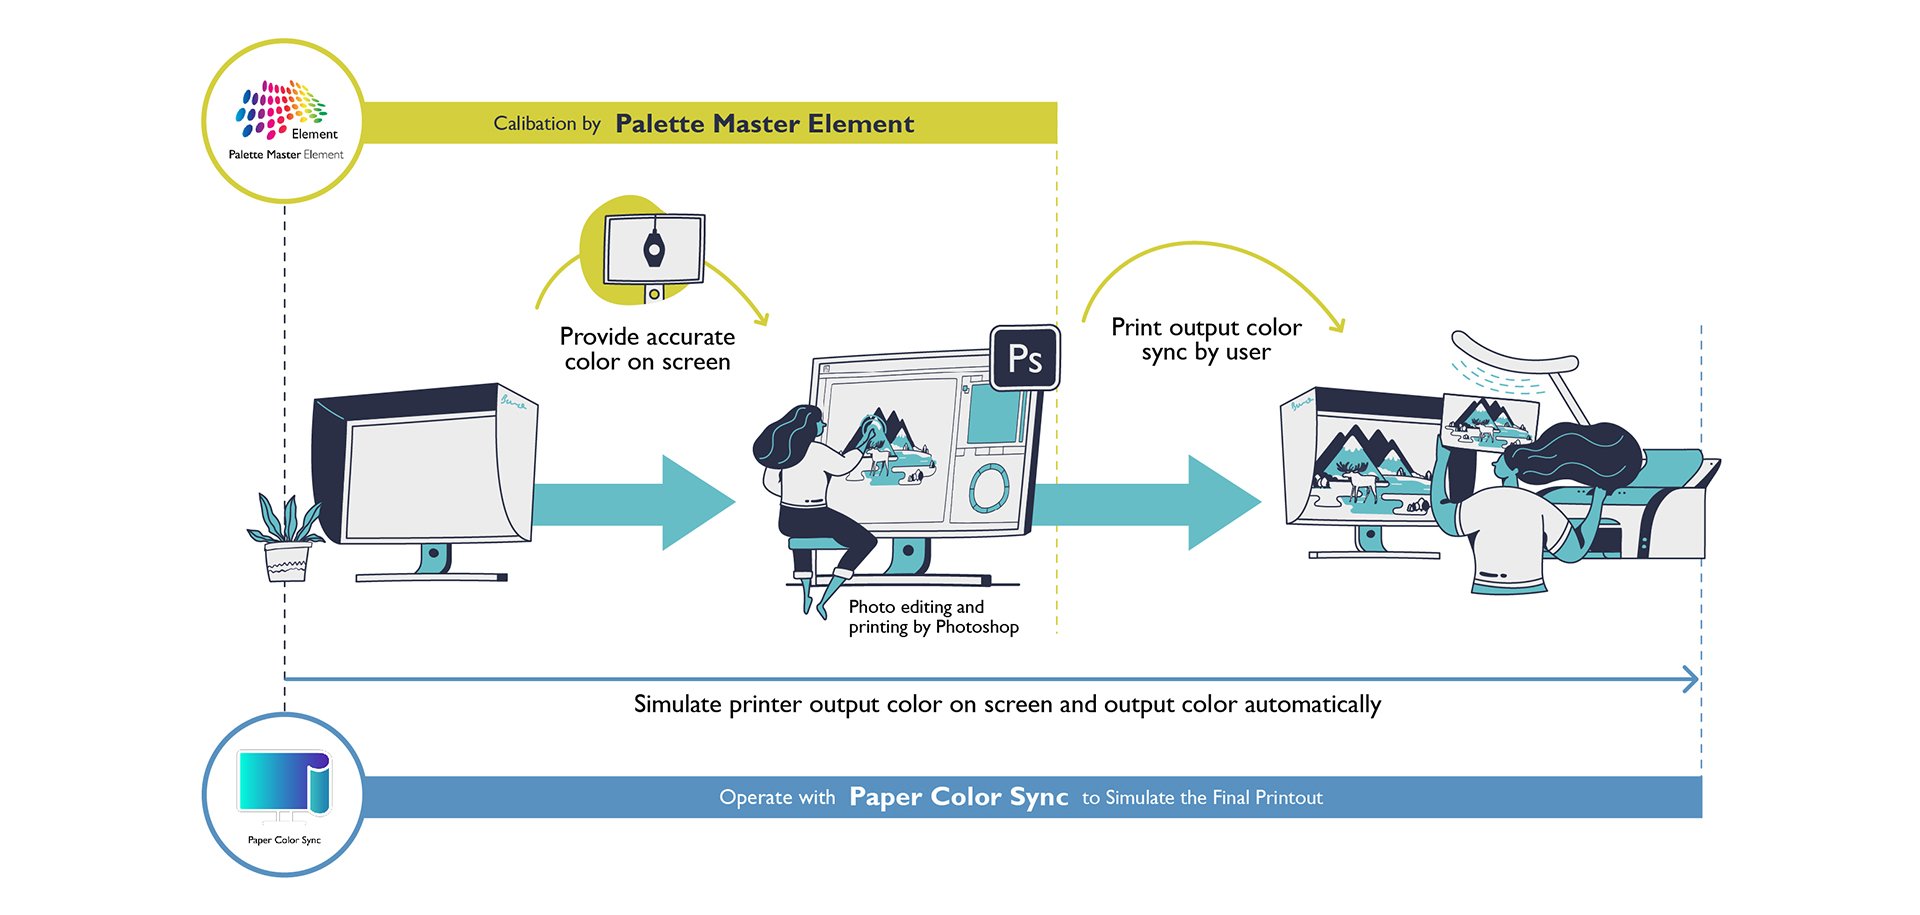 palette master element is in charge of color calibration and paper color sync is for you to preview printing results for screen-to-print color accuracy in few steps